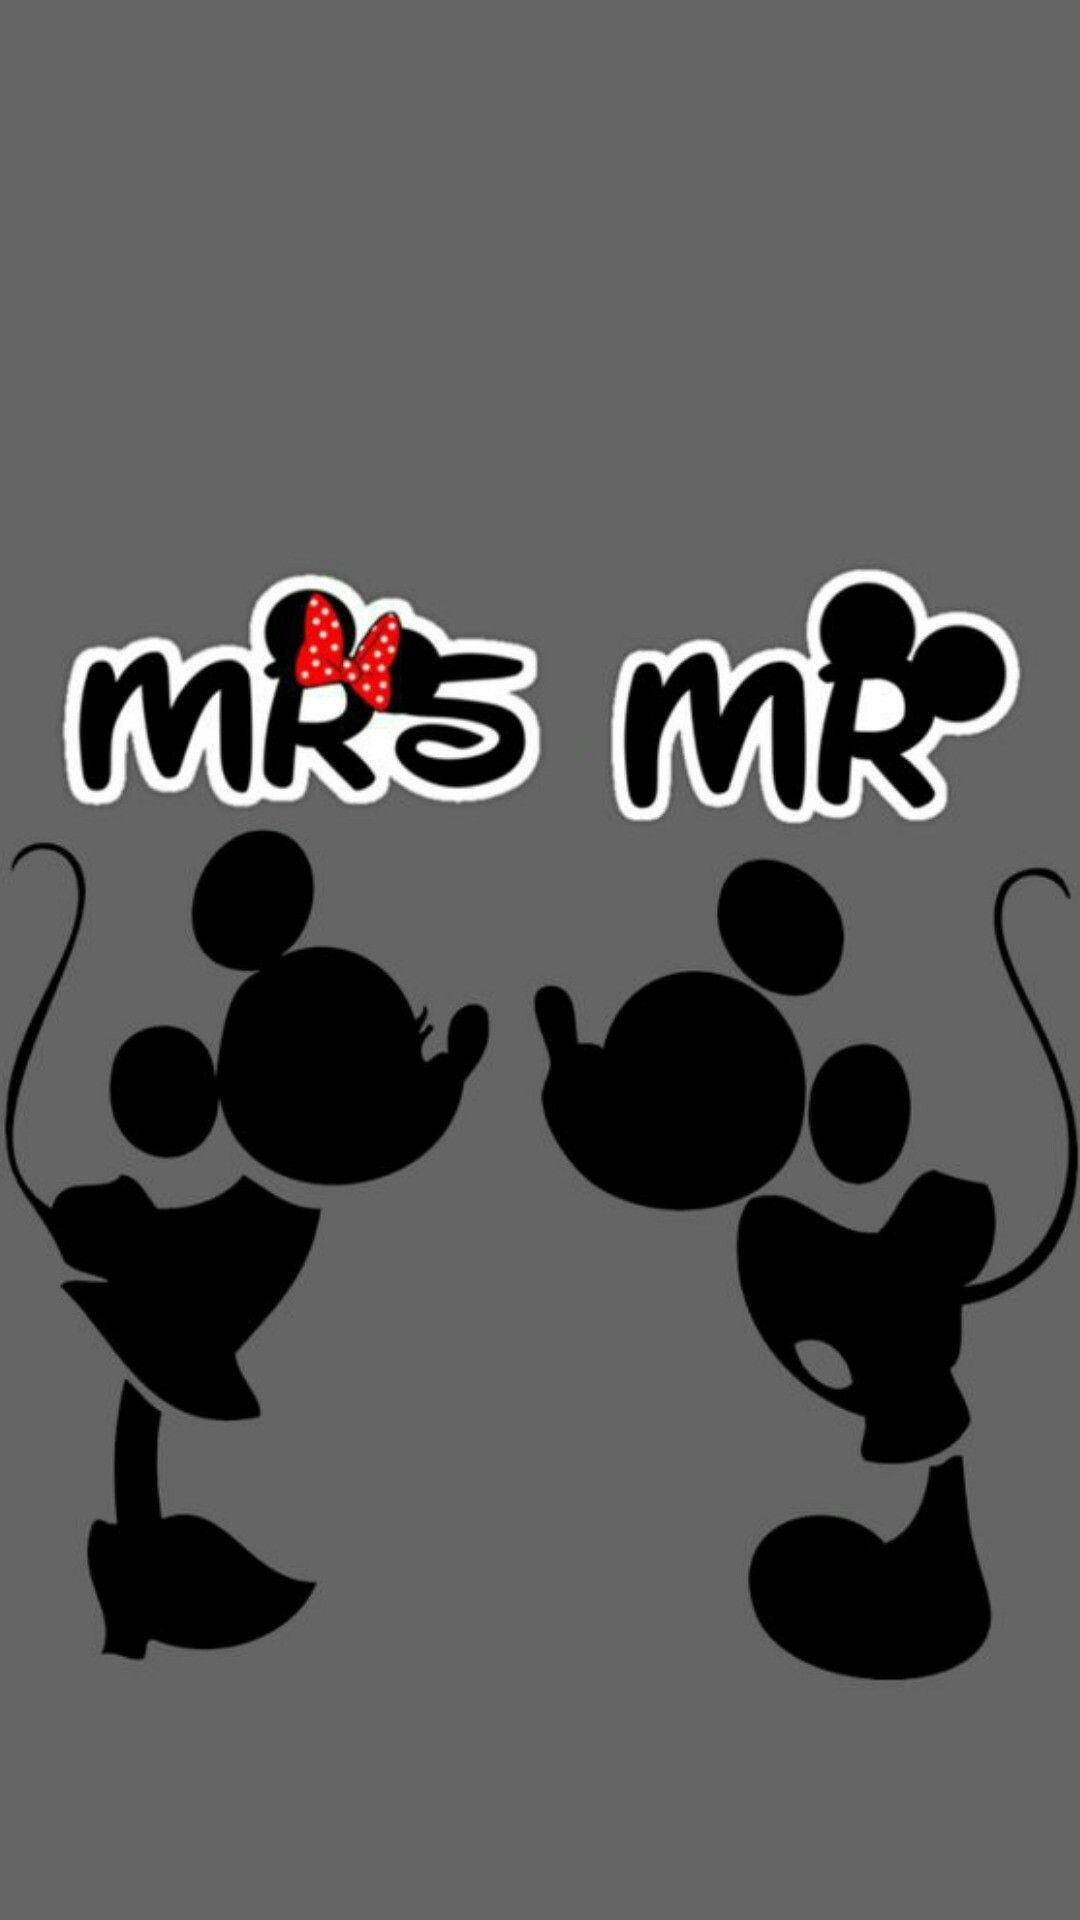 Endearing Mr. and Mrs. Mickey Mouse iPhone Wallpaper Wallpaper